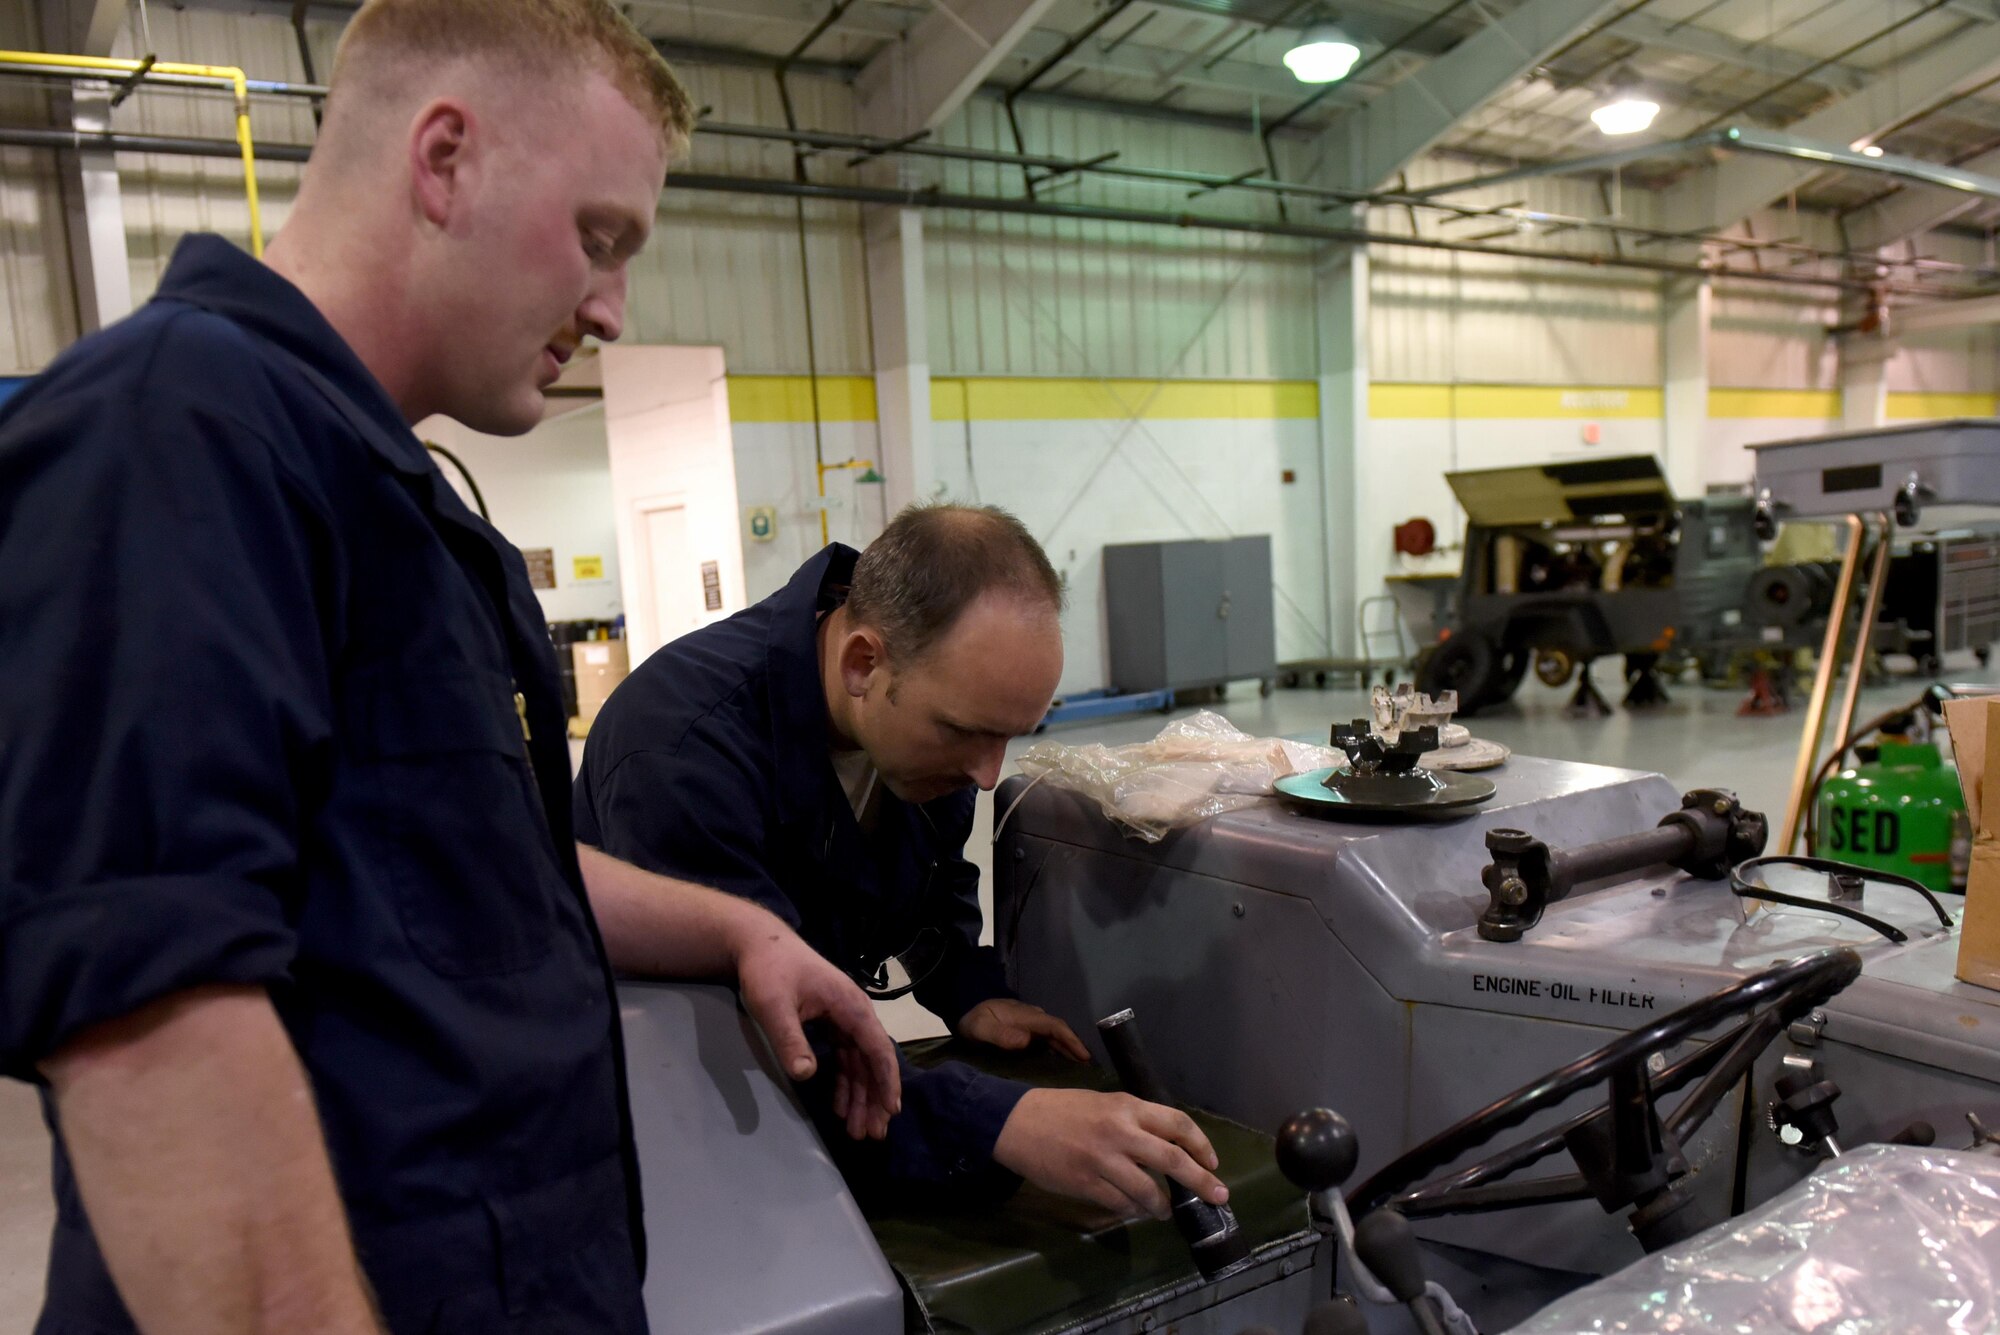 Senior Airman Nicholas Cerwonka (left), 4th Equipment Maintenance Squadron aerospace ground equipment technician, discusses repairs to a bomb lift with Staff Sgt. Patrick Sellers (right), 4th EMS AGE technician, March 15, 2017, at Seymour Johnson Air Force Base, North Carolina. AGE Airmen repair equipment used by aircraft maintainers on the flight line. (U.S. Air Force photo by Airman 1st Class Victoria Boyton) 